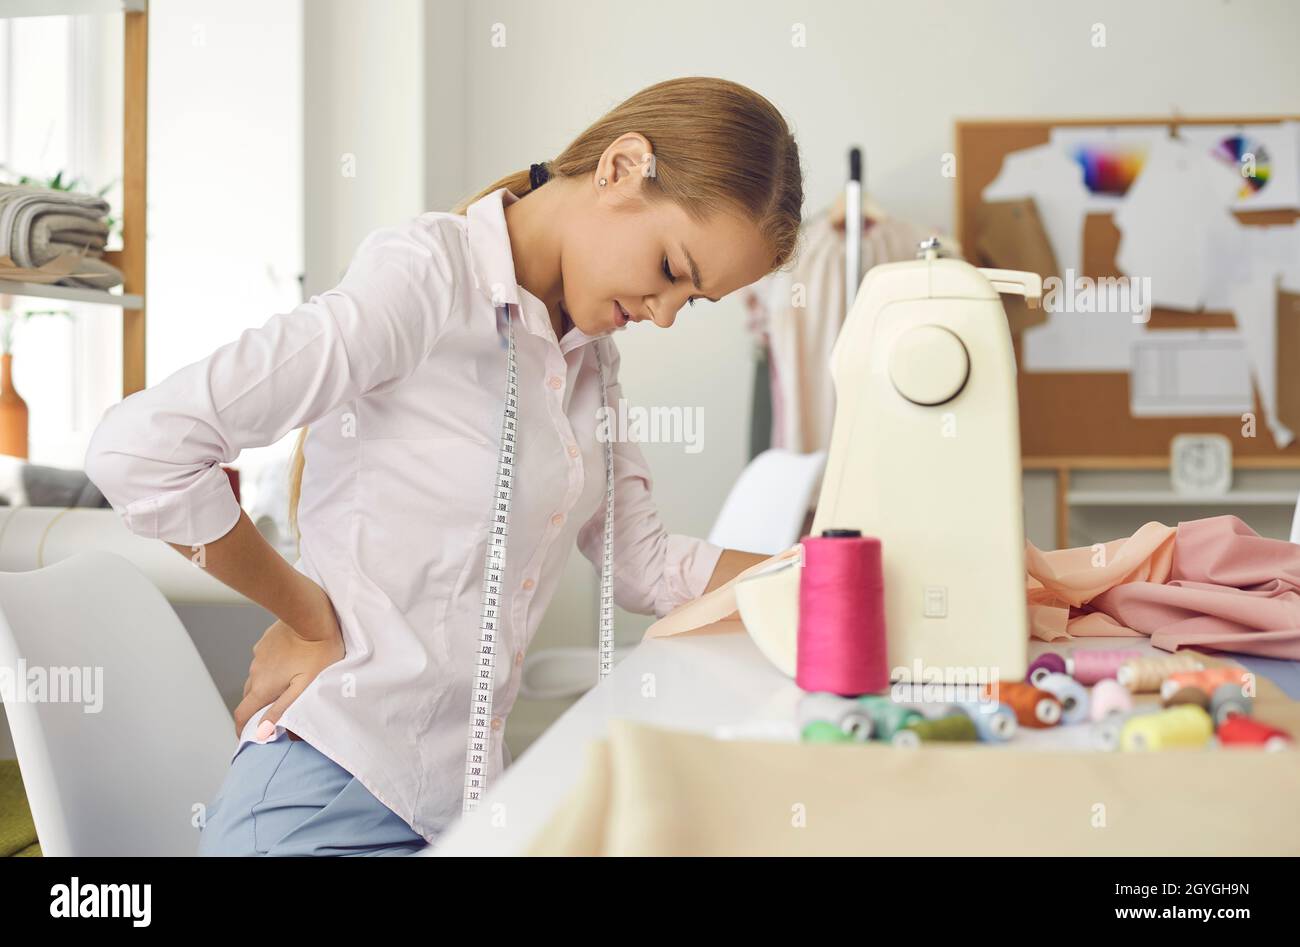 Tired woman who works as a tailor and has bad posture is suffering from back pain Stock Photo